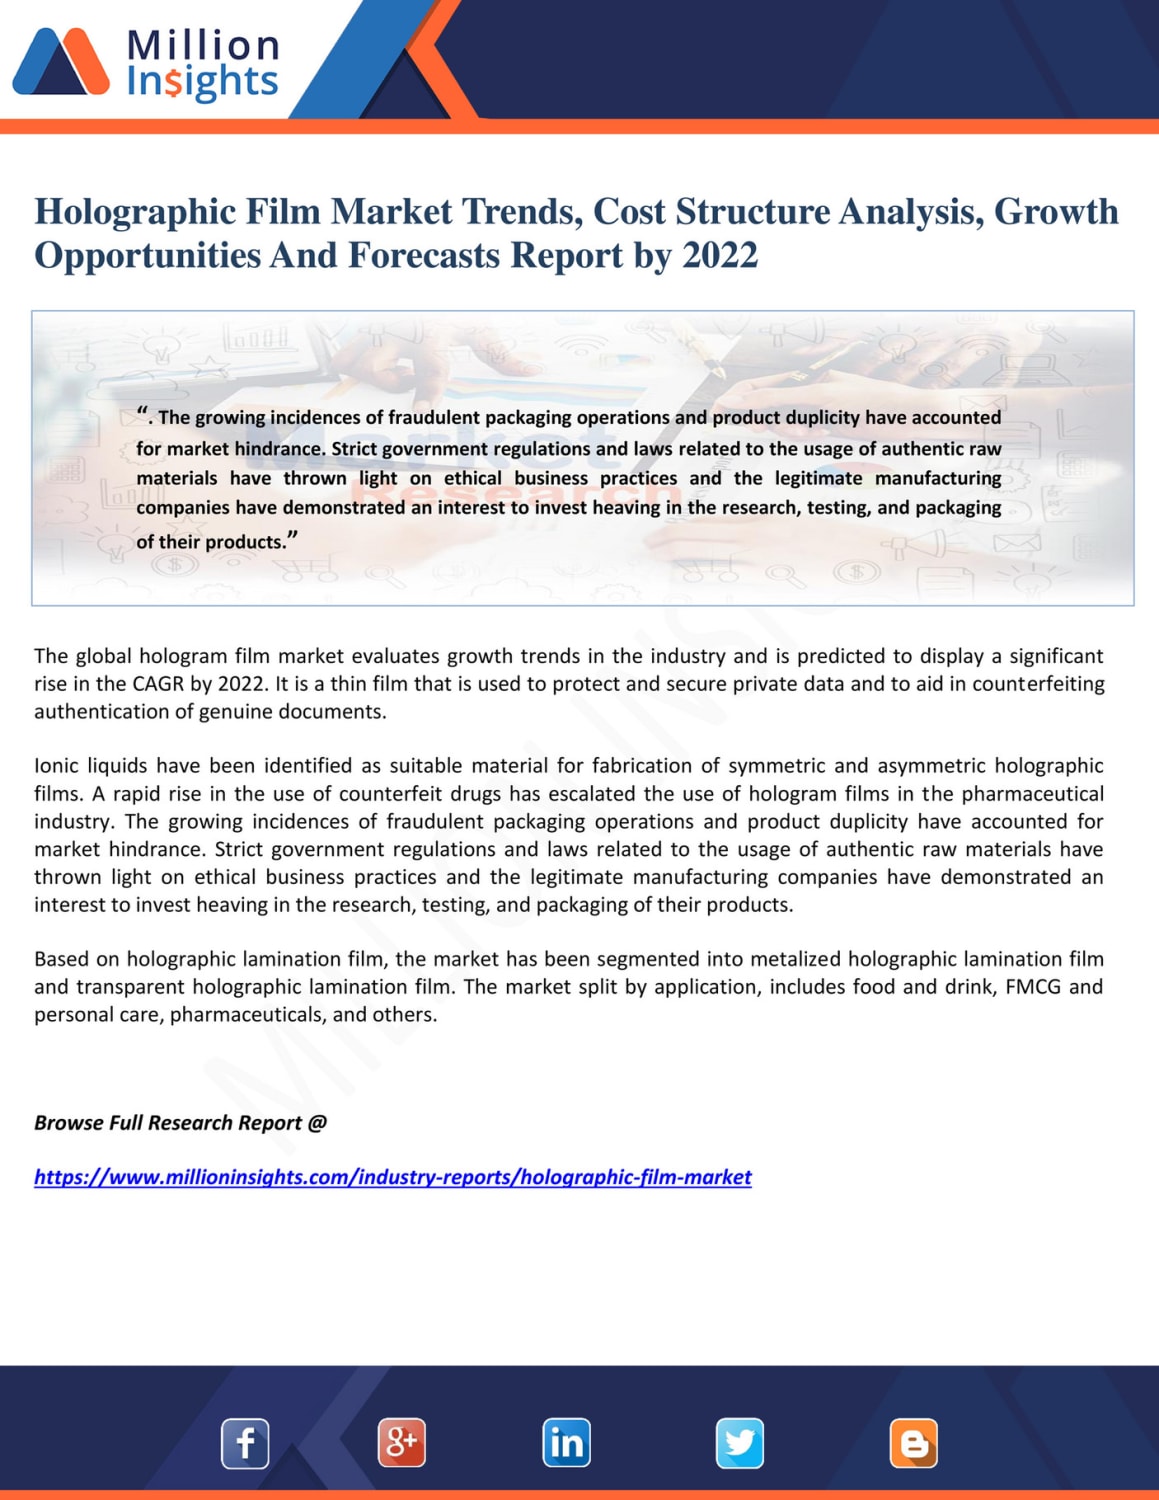 Million Insights - Holographic Film Market Trends, Cost Structure Analysis, Growth Opportunities And Forecasts Report by 2025 - Page 1 - Created with Publitas.com